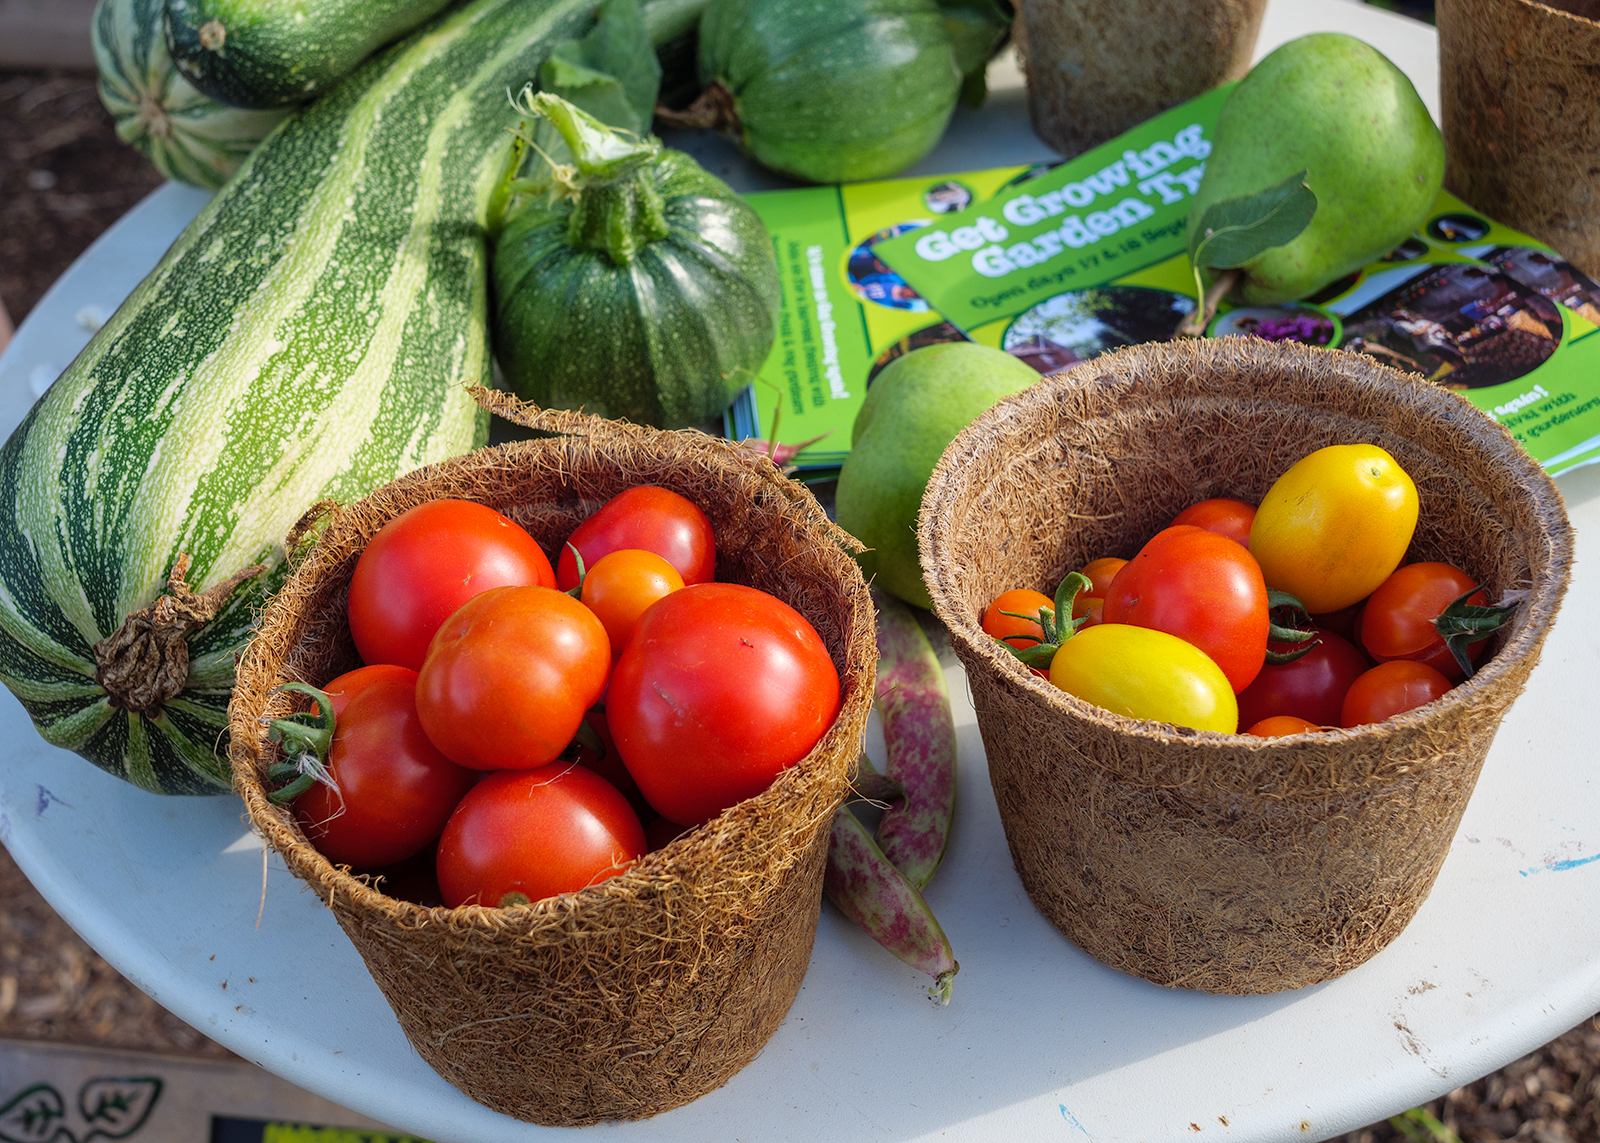 Tomatoes, marrows and courgettes harvested at the Get Growing Trail 2022.